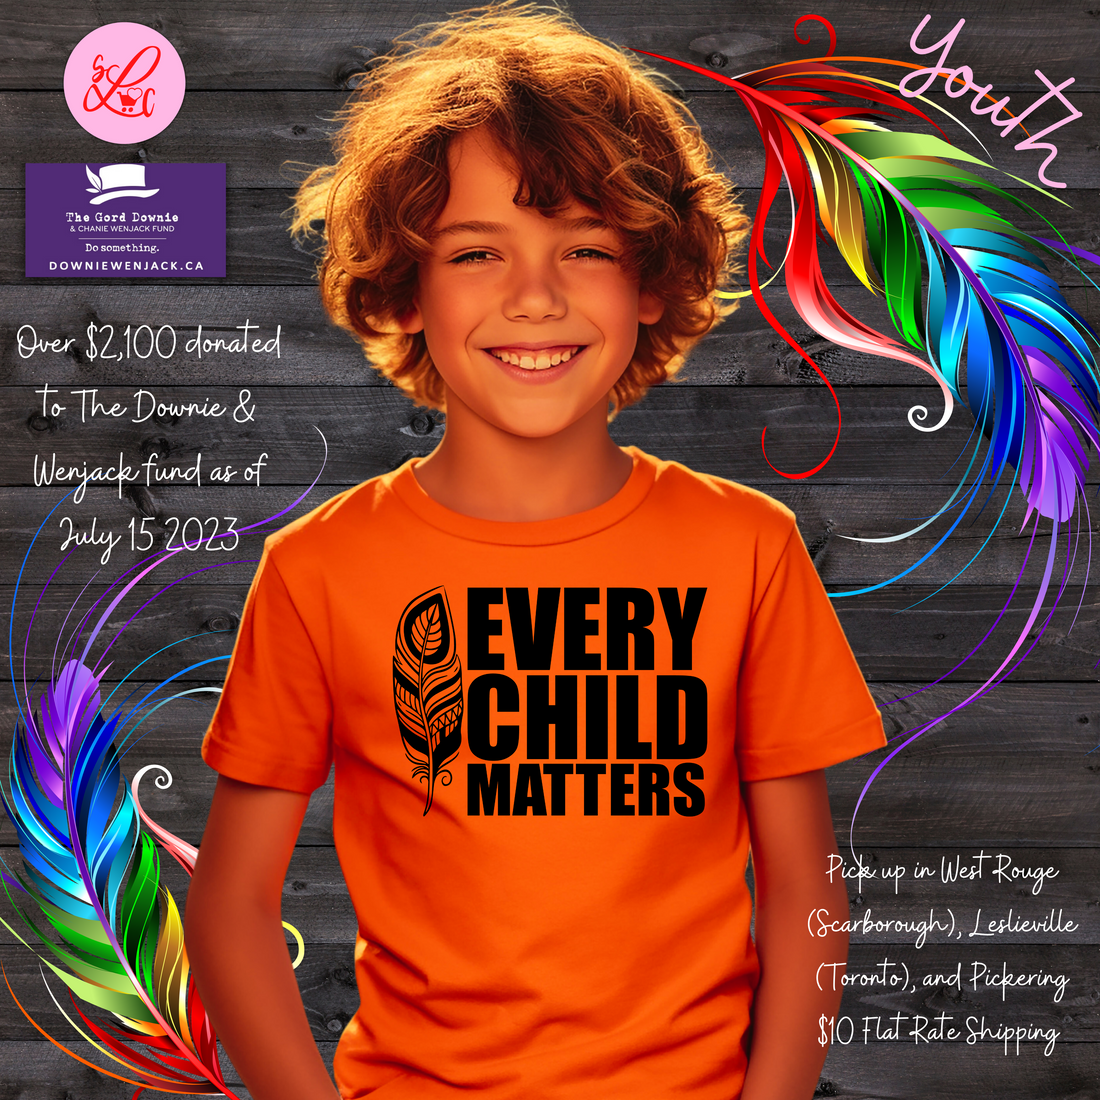 Youth T-Shirt, Orange Shirt Day, Every Child Matters. Indigenous Reconciliation